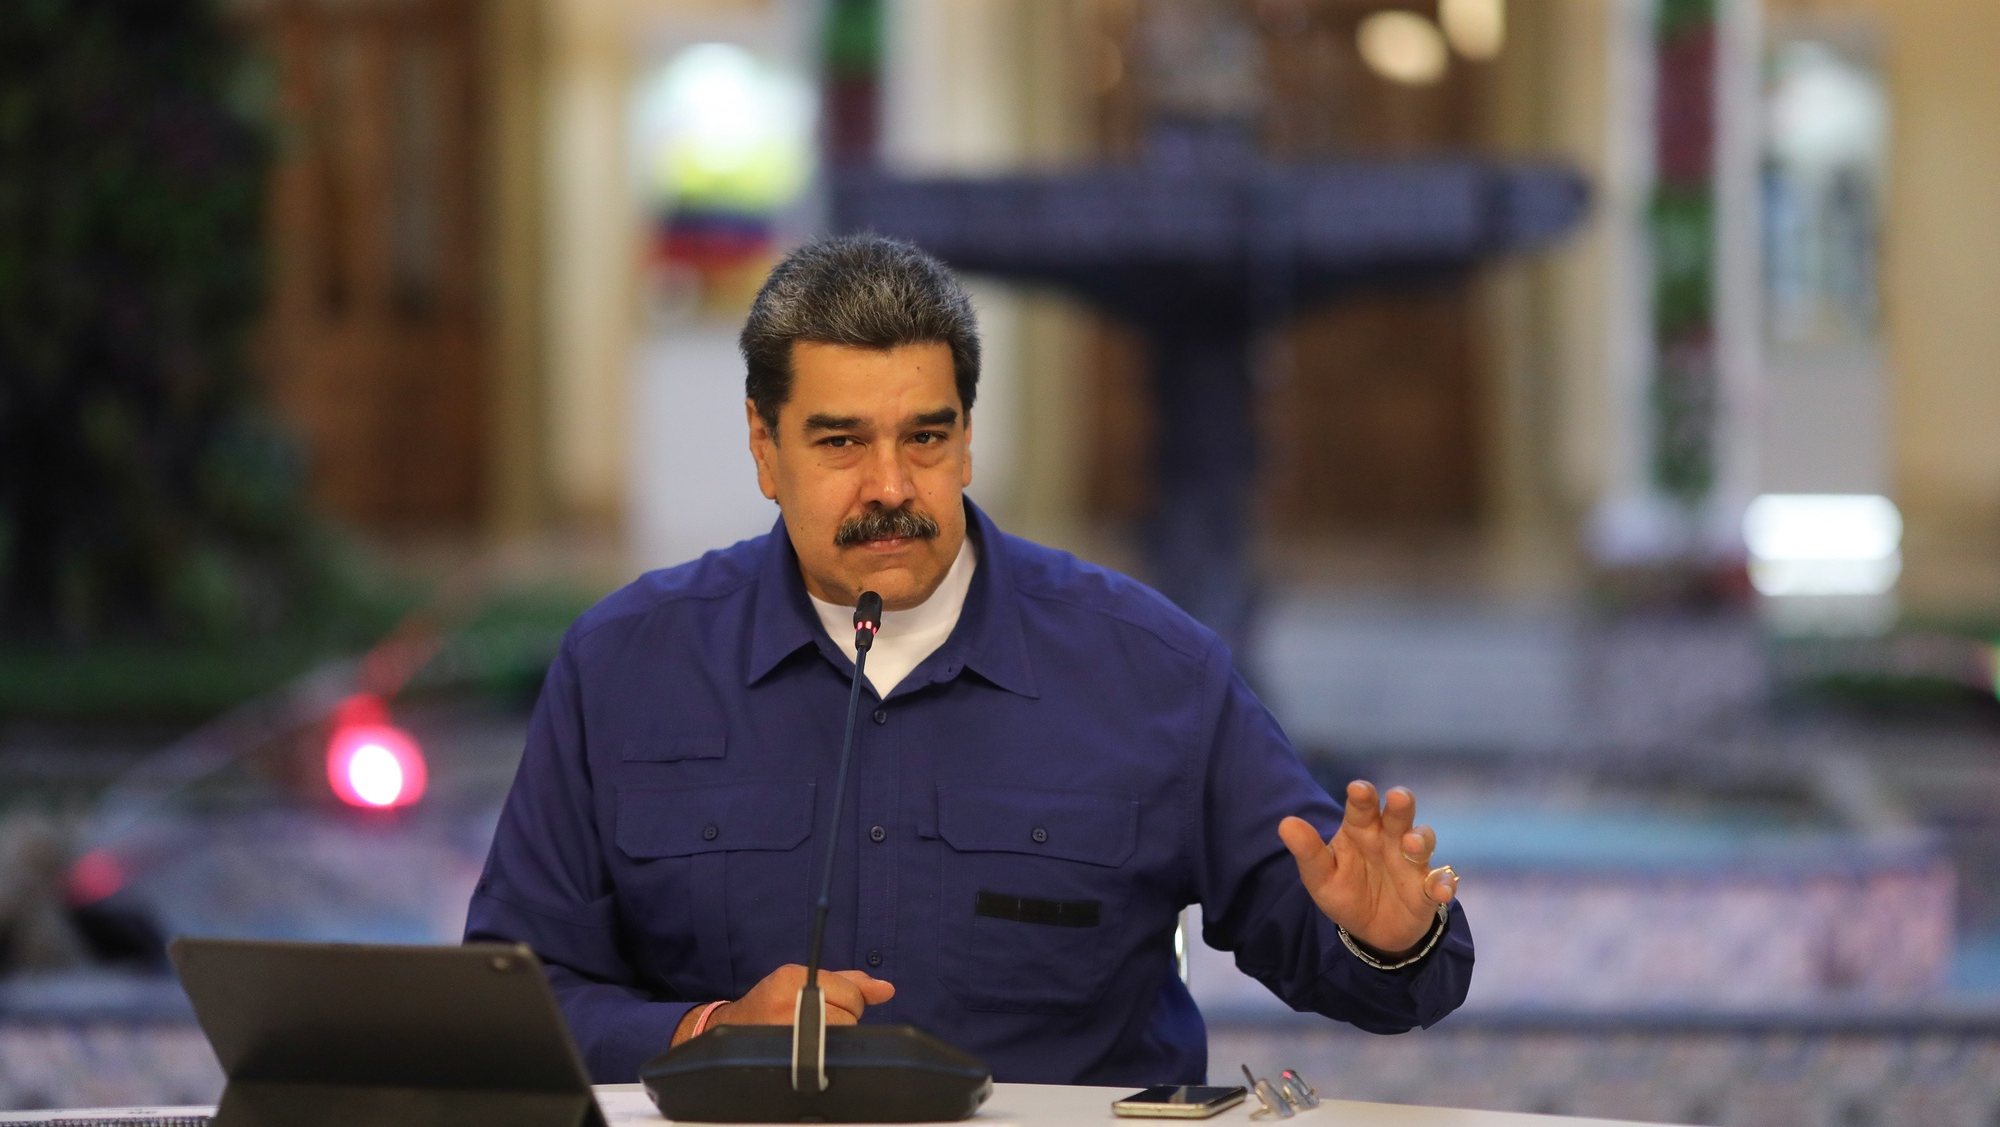 epa09941386 A handout photo made available by the press office of the Miraflores Palace shows the President of Venezuela Nicolas Maduro during statements at the Miraflores Palace, in Caracas, Venezuela, 11 May 2022. Maduro urged all the productive sectors to expand their production, and as a specific goal, to &#039;build an export route that occupies at least 20 percent of the production&#039;, in addition to the participation in the national market.  EPA/press office of the Miraflores P HANDOUT EDITORIAL USE ONLY/ONLY AVAILABLE TO ILLUSTRATE THE ACCOMPANYING NEWS (MANDATORY CREDIT) HANDOUT EDITORIAL USE ONLY/NO SALES